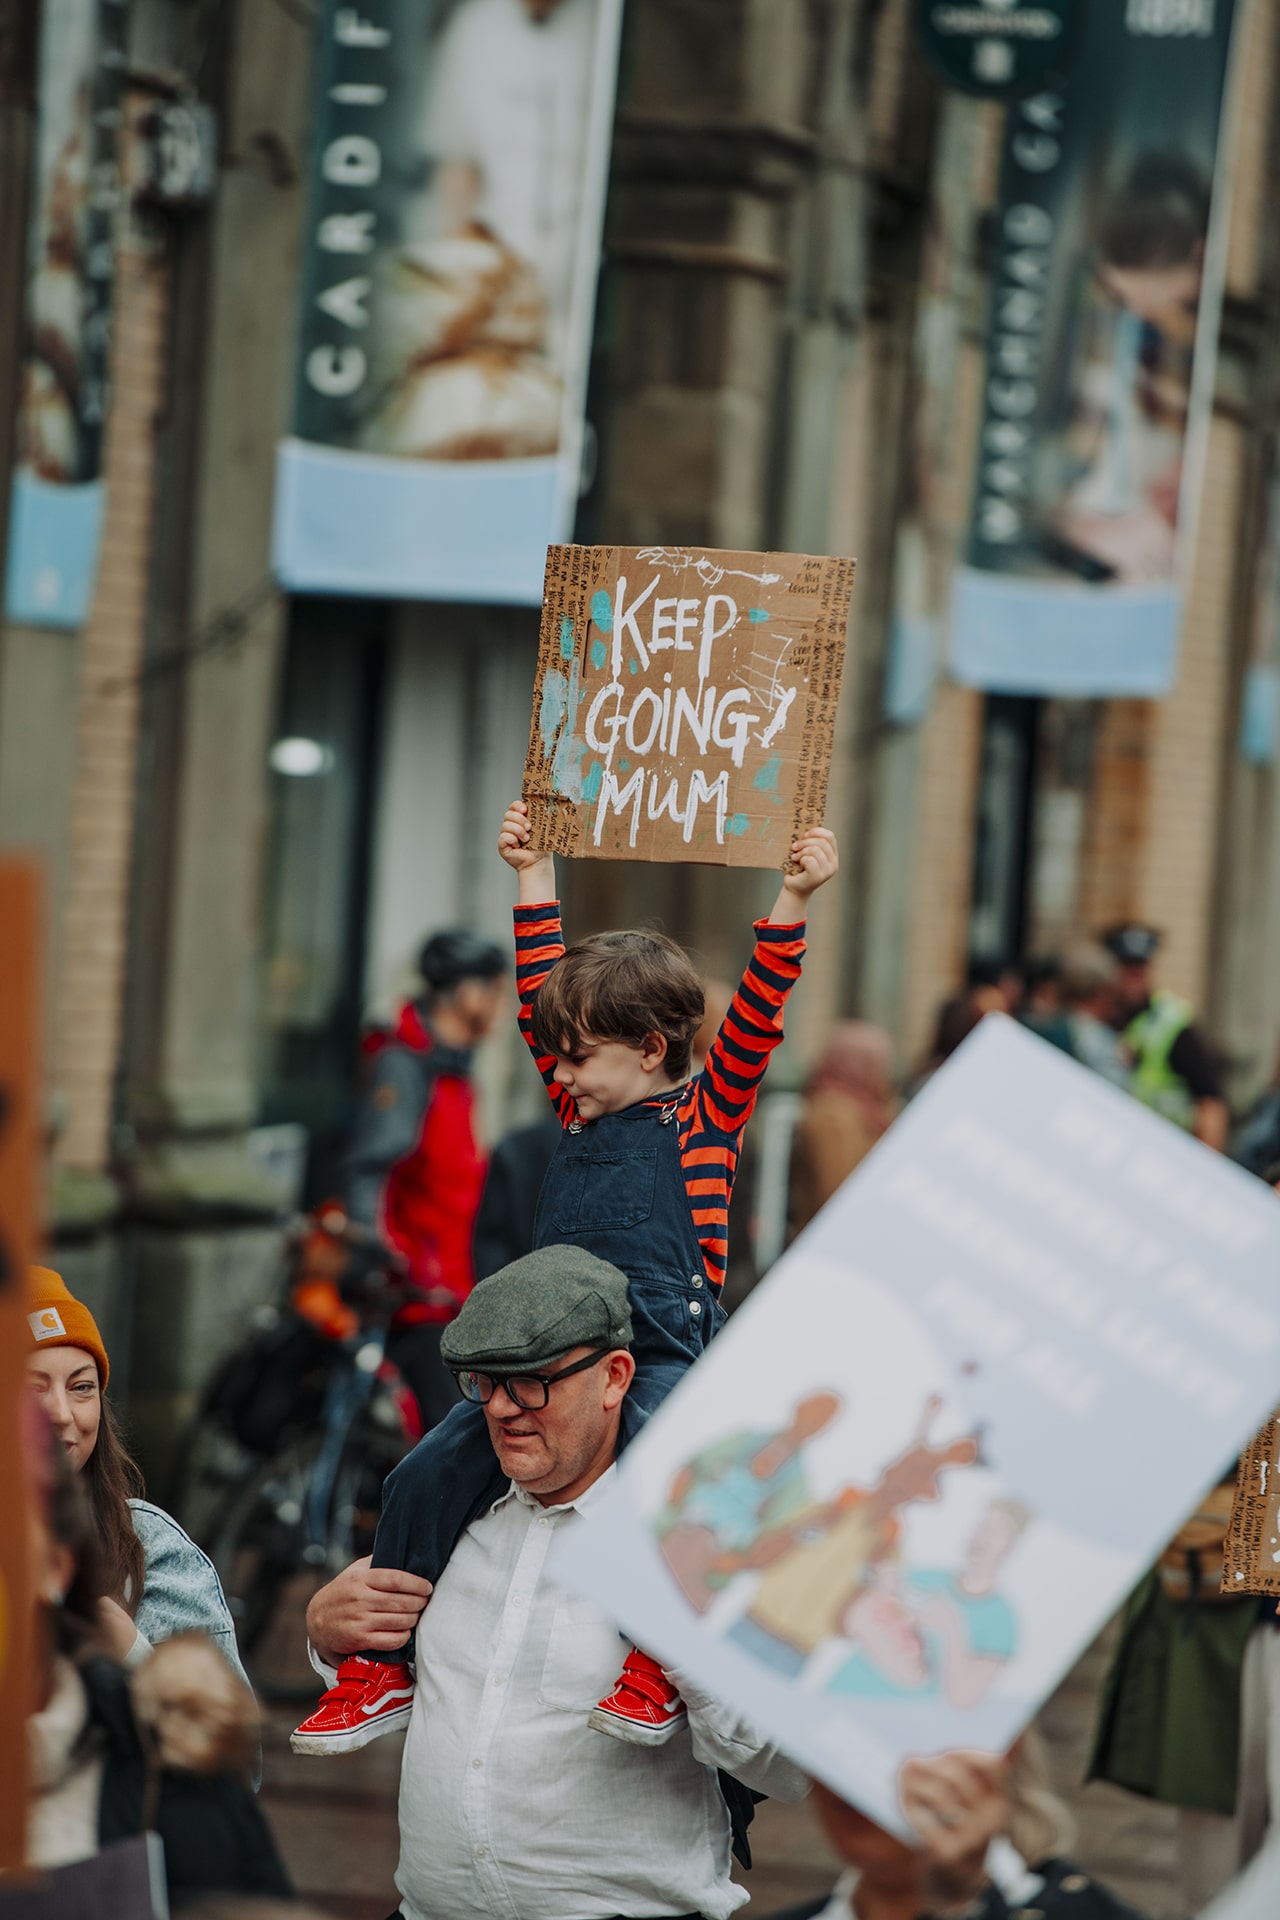 Alt text: xhild on his fathers' shoulders holding up a sign saying 